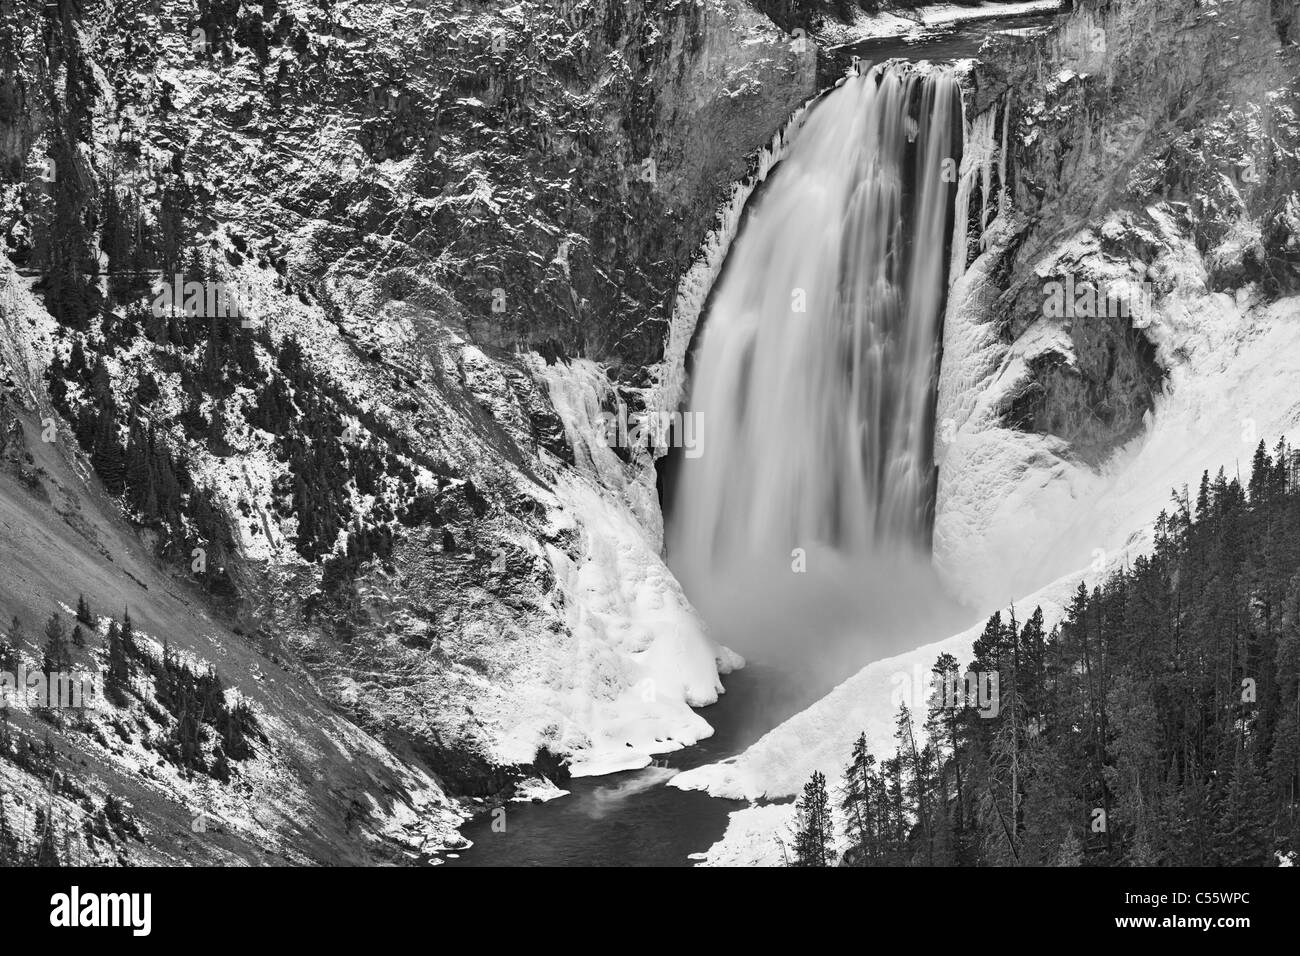 Waterfall in a forest, Lower Yellowstone Falls, Grand Canyon of the Yellowstone, Yellowstone National Park, Wyoming, USA Stock Photo